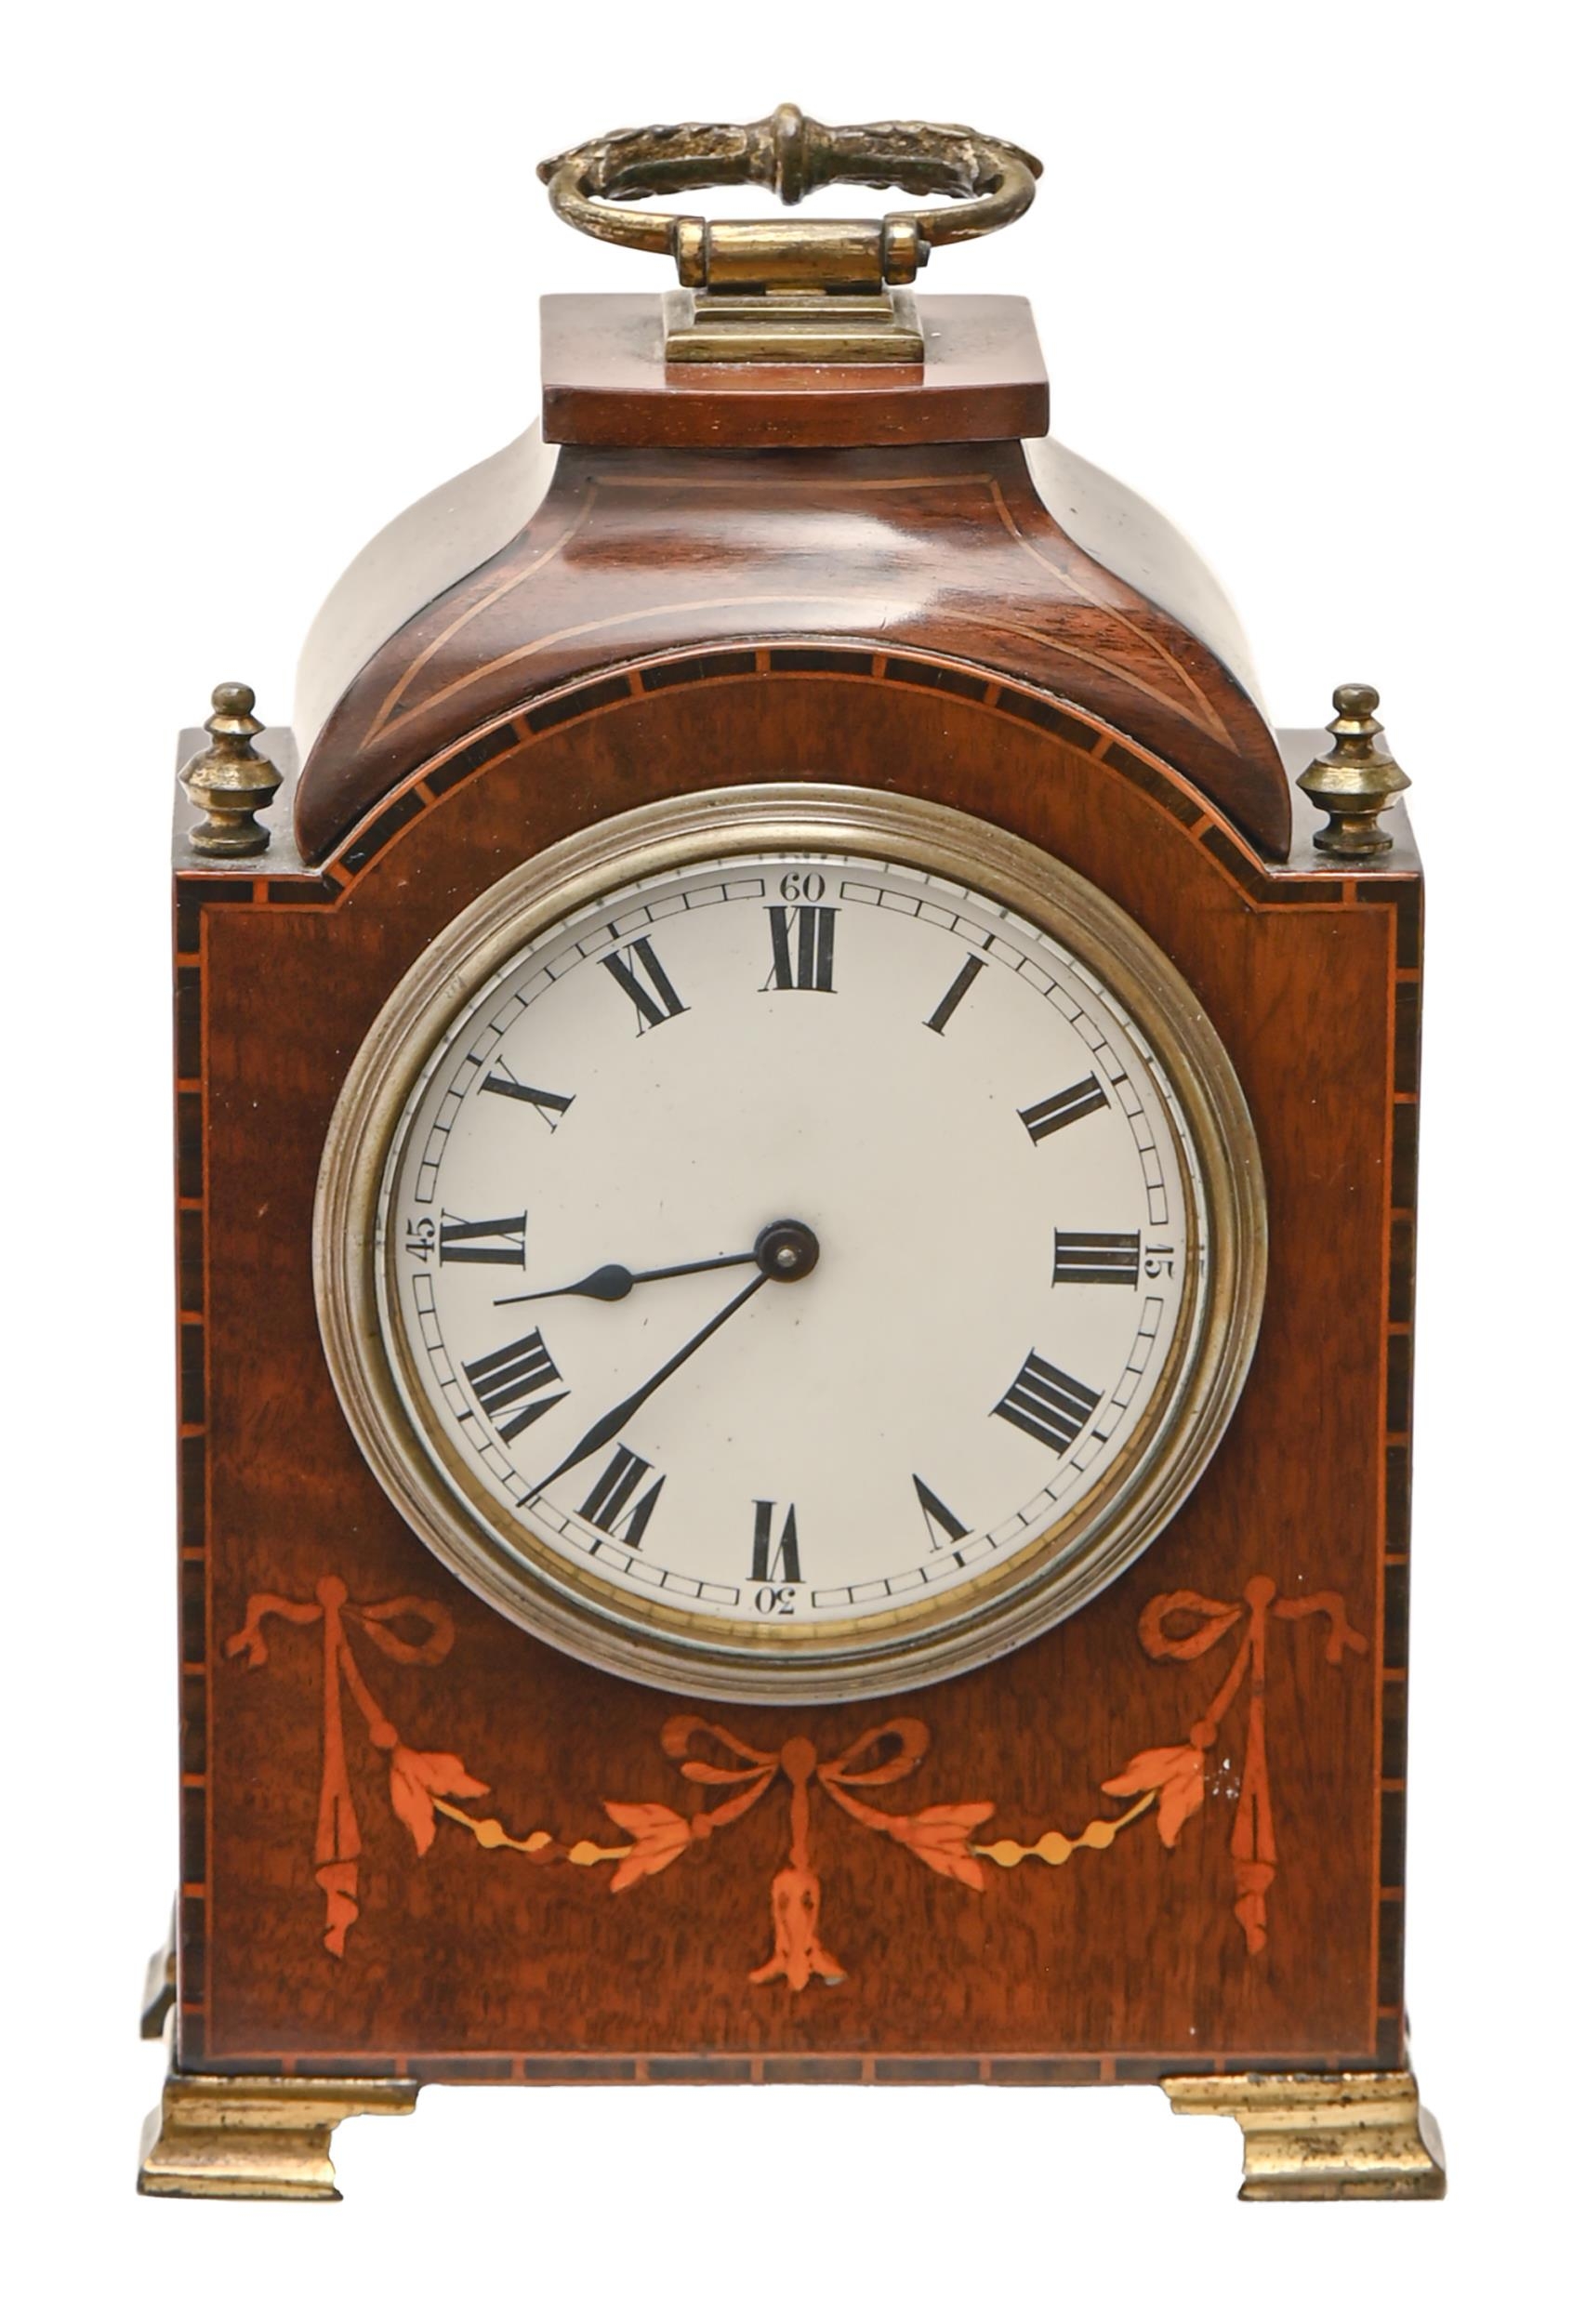 A mahogany and inlaid mantel timepiece, early 20th c, with brass handle, finials and ogee feet,